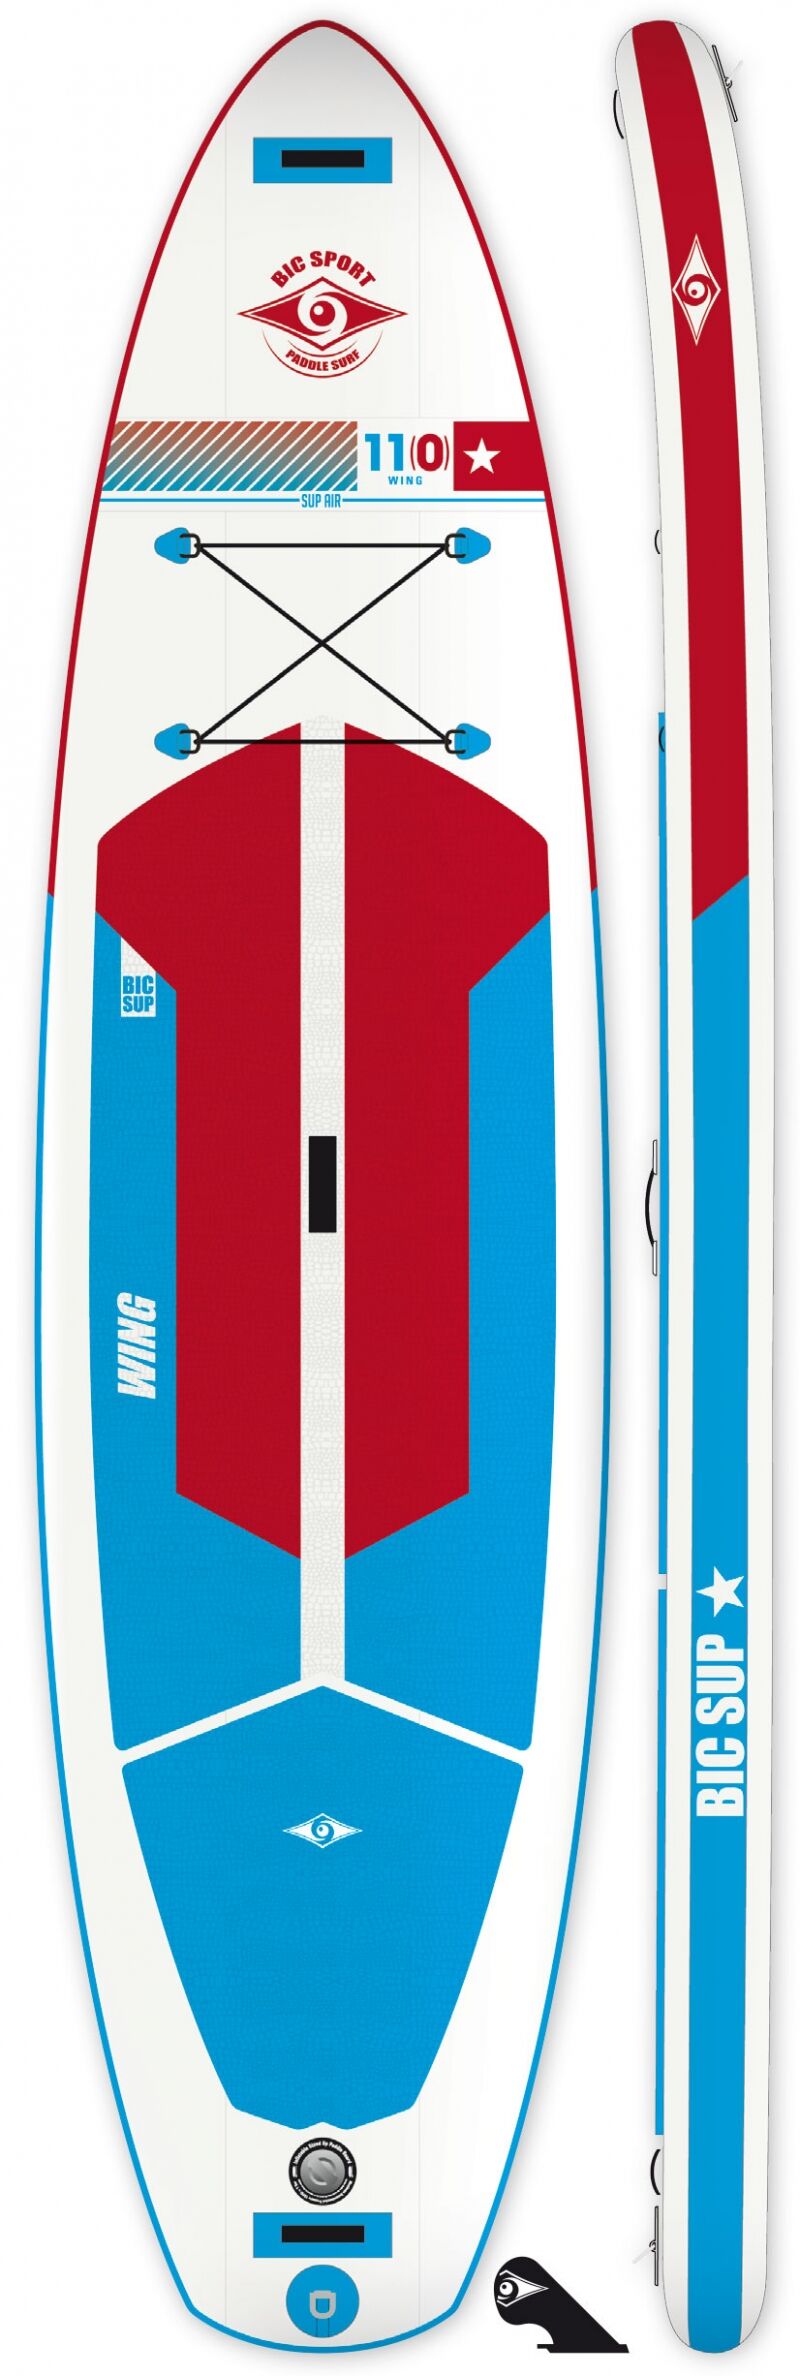 Tahe Outdoor 11'0" Wing Air - Uppblåsbar Stand Up Paddle